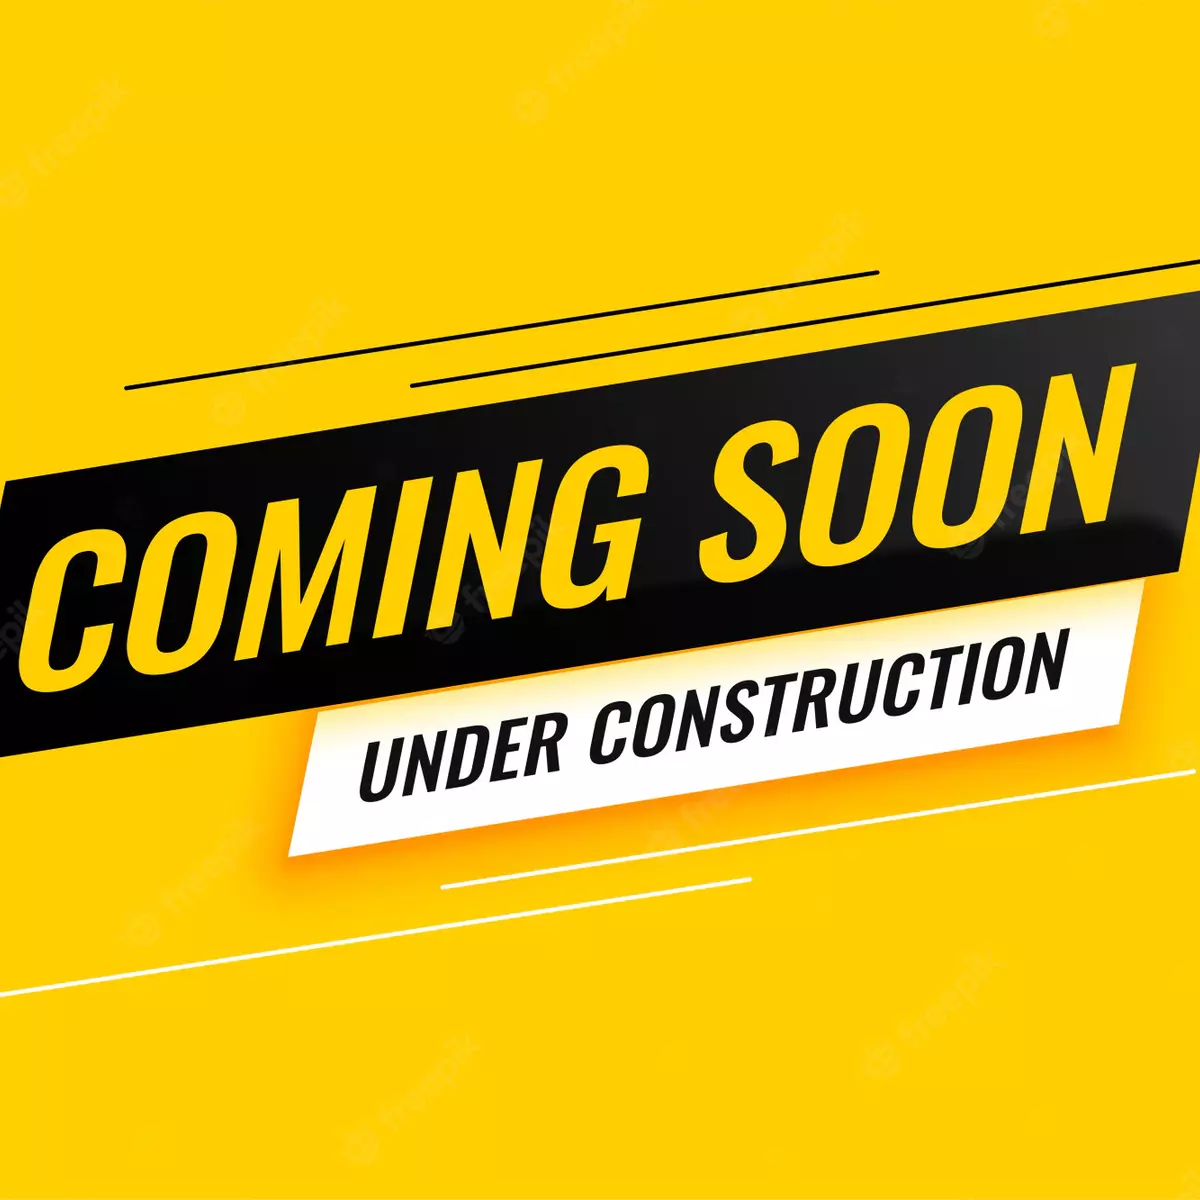 COMING SOON UNDER CONSTRUCTION